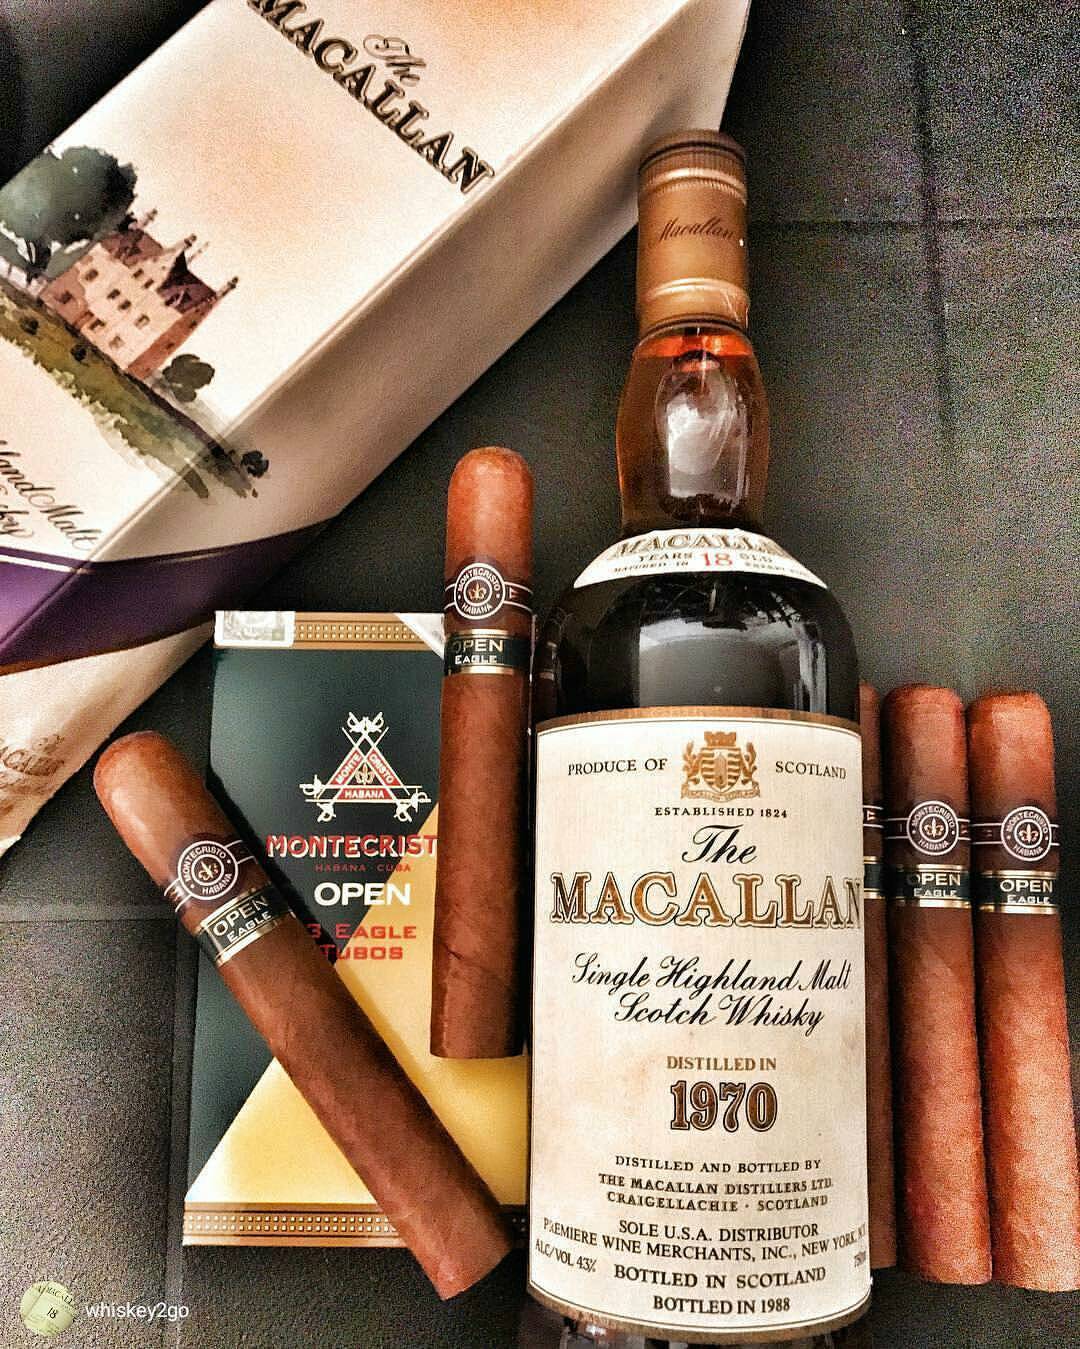 Everything here is just 👌
#Macallan
#Montecristo
#Repost 📸 from @whiskey2go
WWW.CIGARSANDWHISKEYS.COM
Like 👍, Repost 🔃, Tag 🔖 Follow 👣 Us & Subscribe ✍ on👇:...